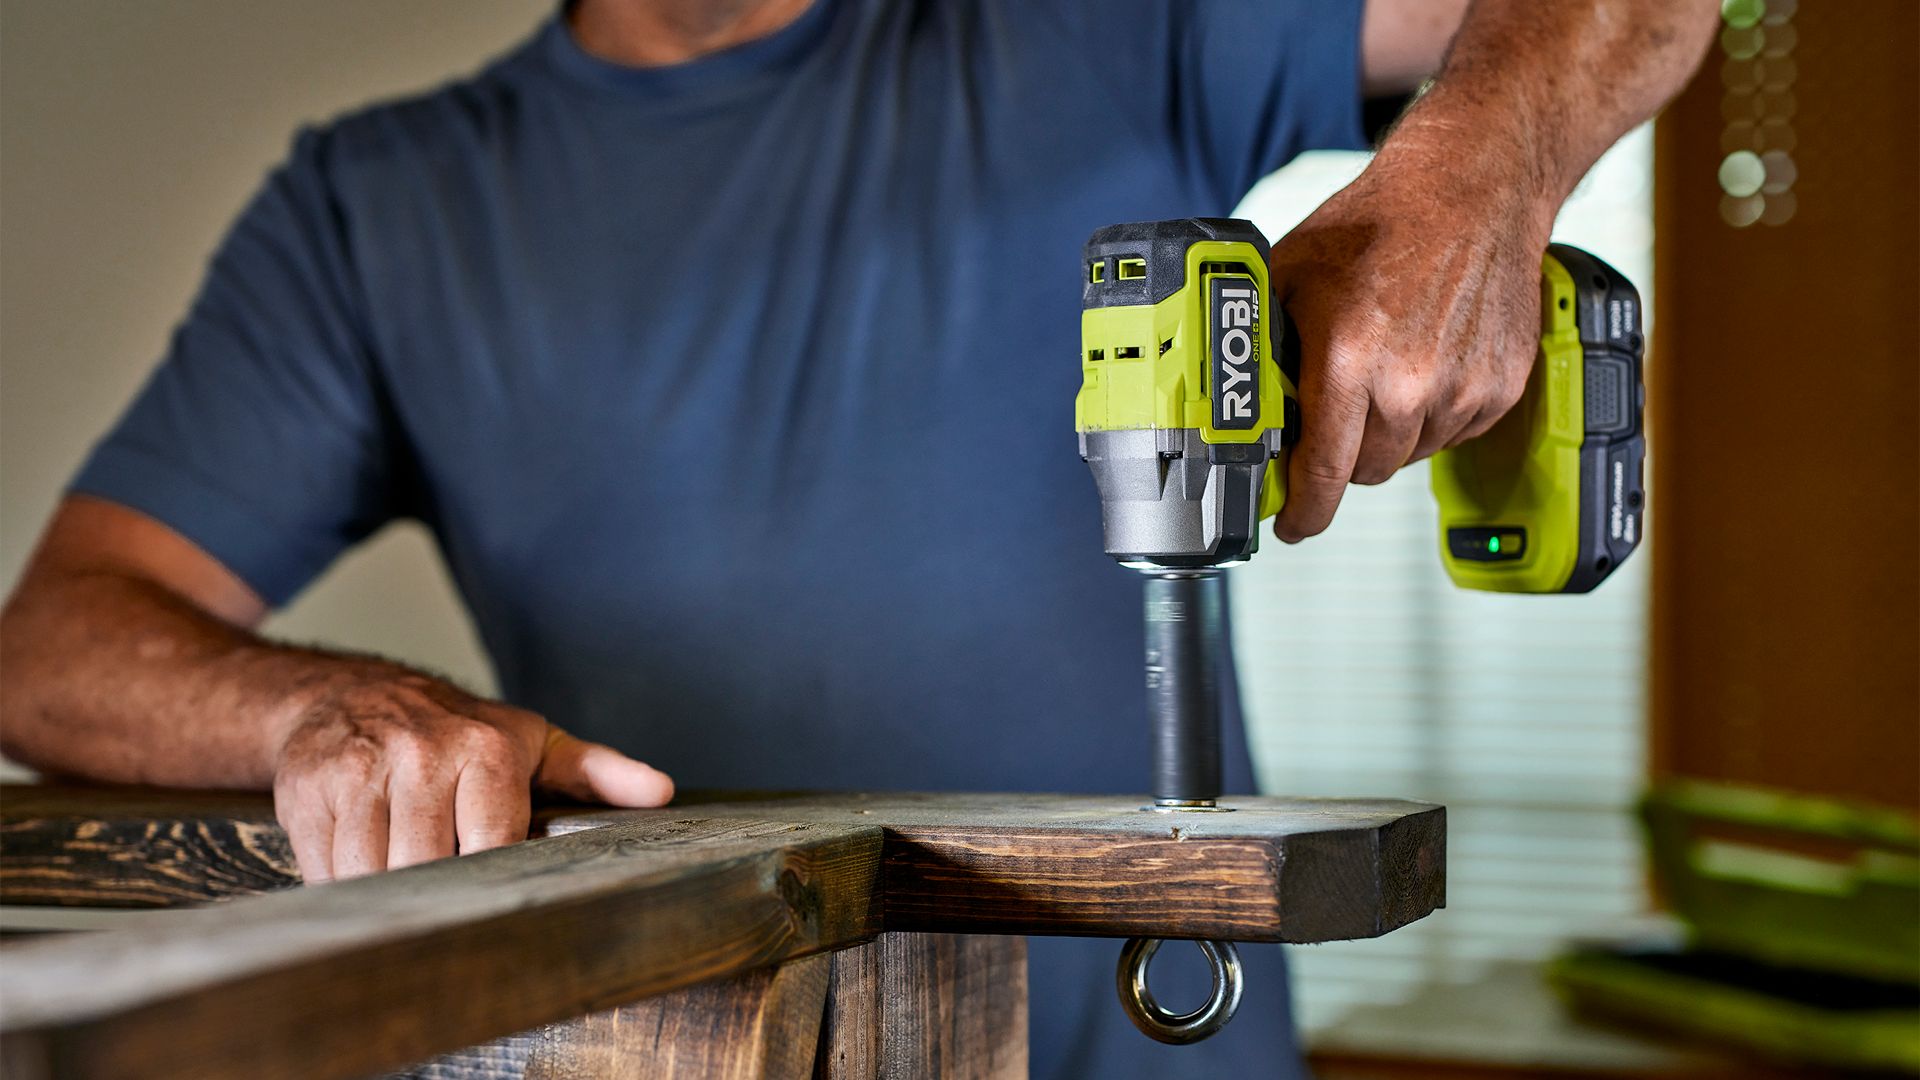 Get two Ryobi batteries and a free power tool for $99 right now at